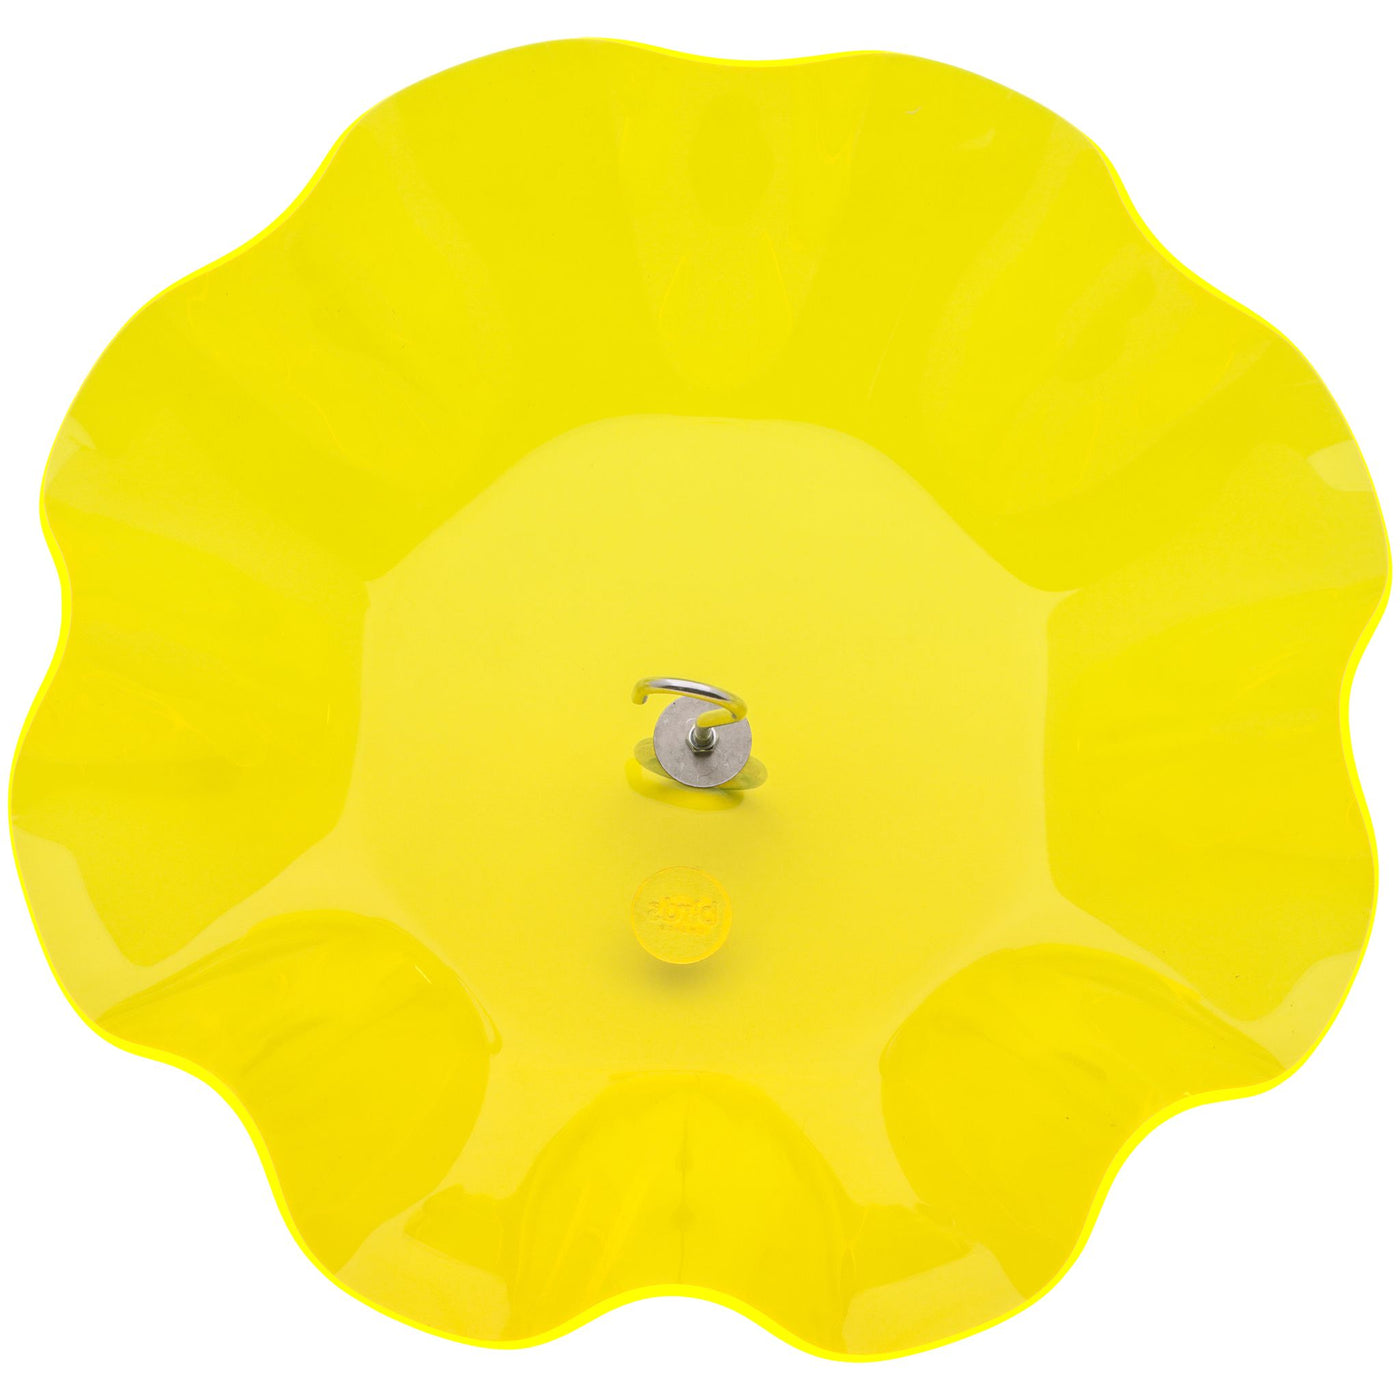 Fluorescent Yellow  Protective Cover for Hanging Bird Feeder with Scalloped Edges - Birds Choice